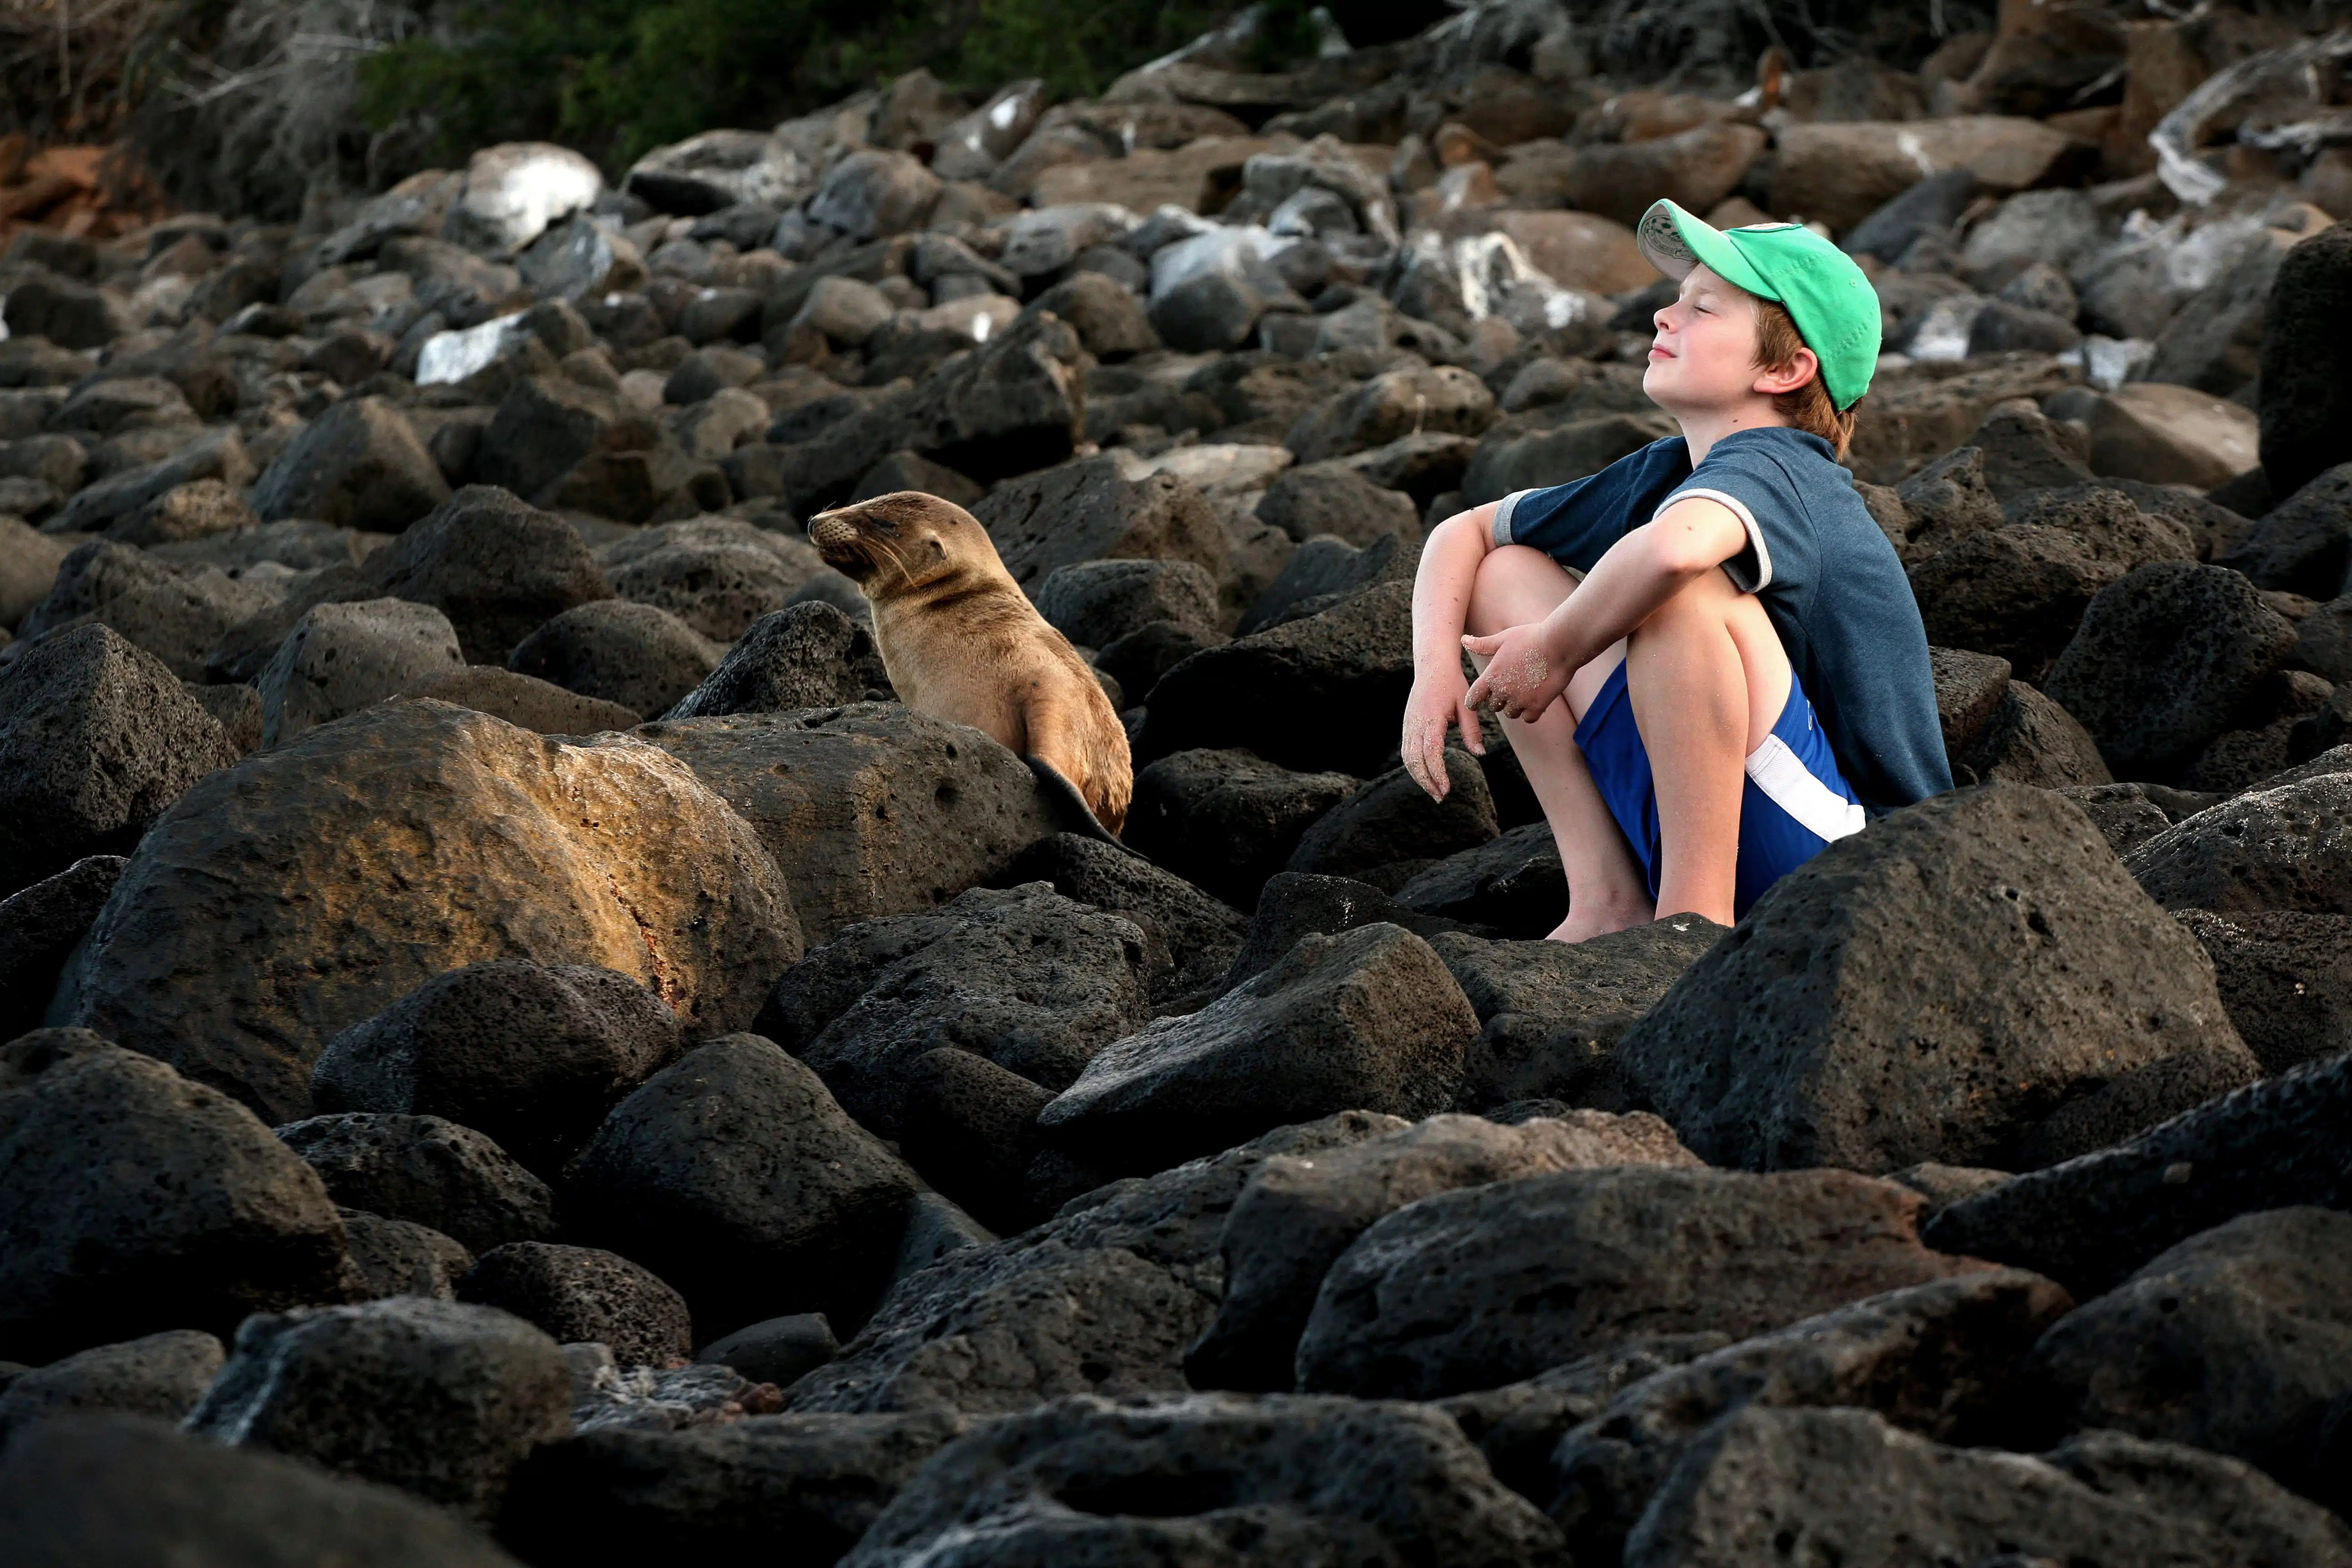 Boy sits on rocks with baby sea lion